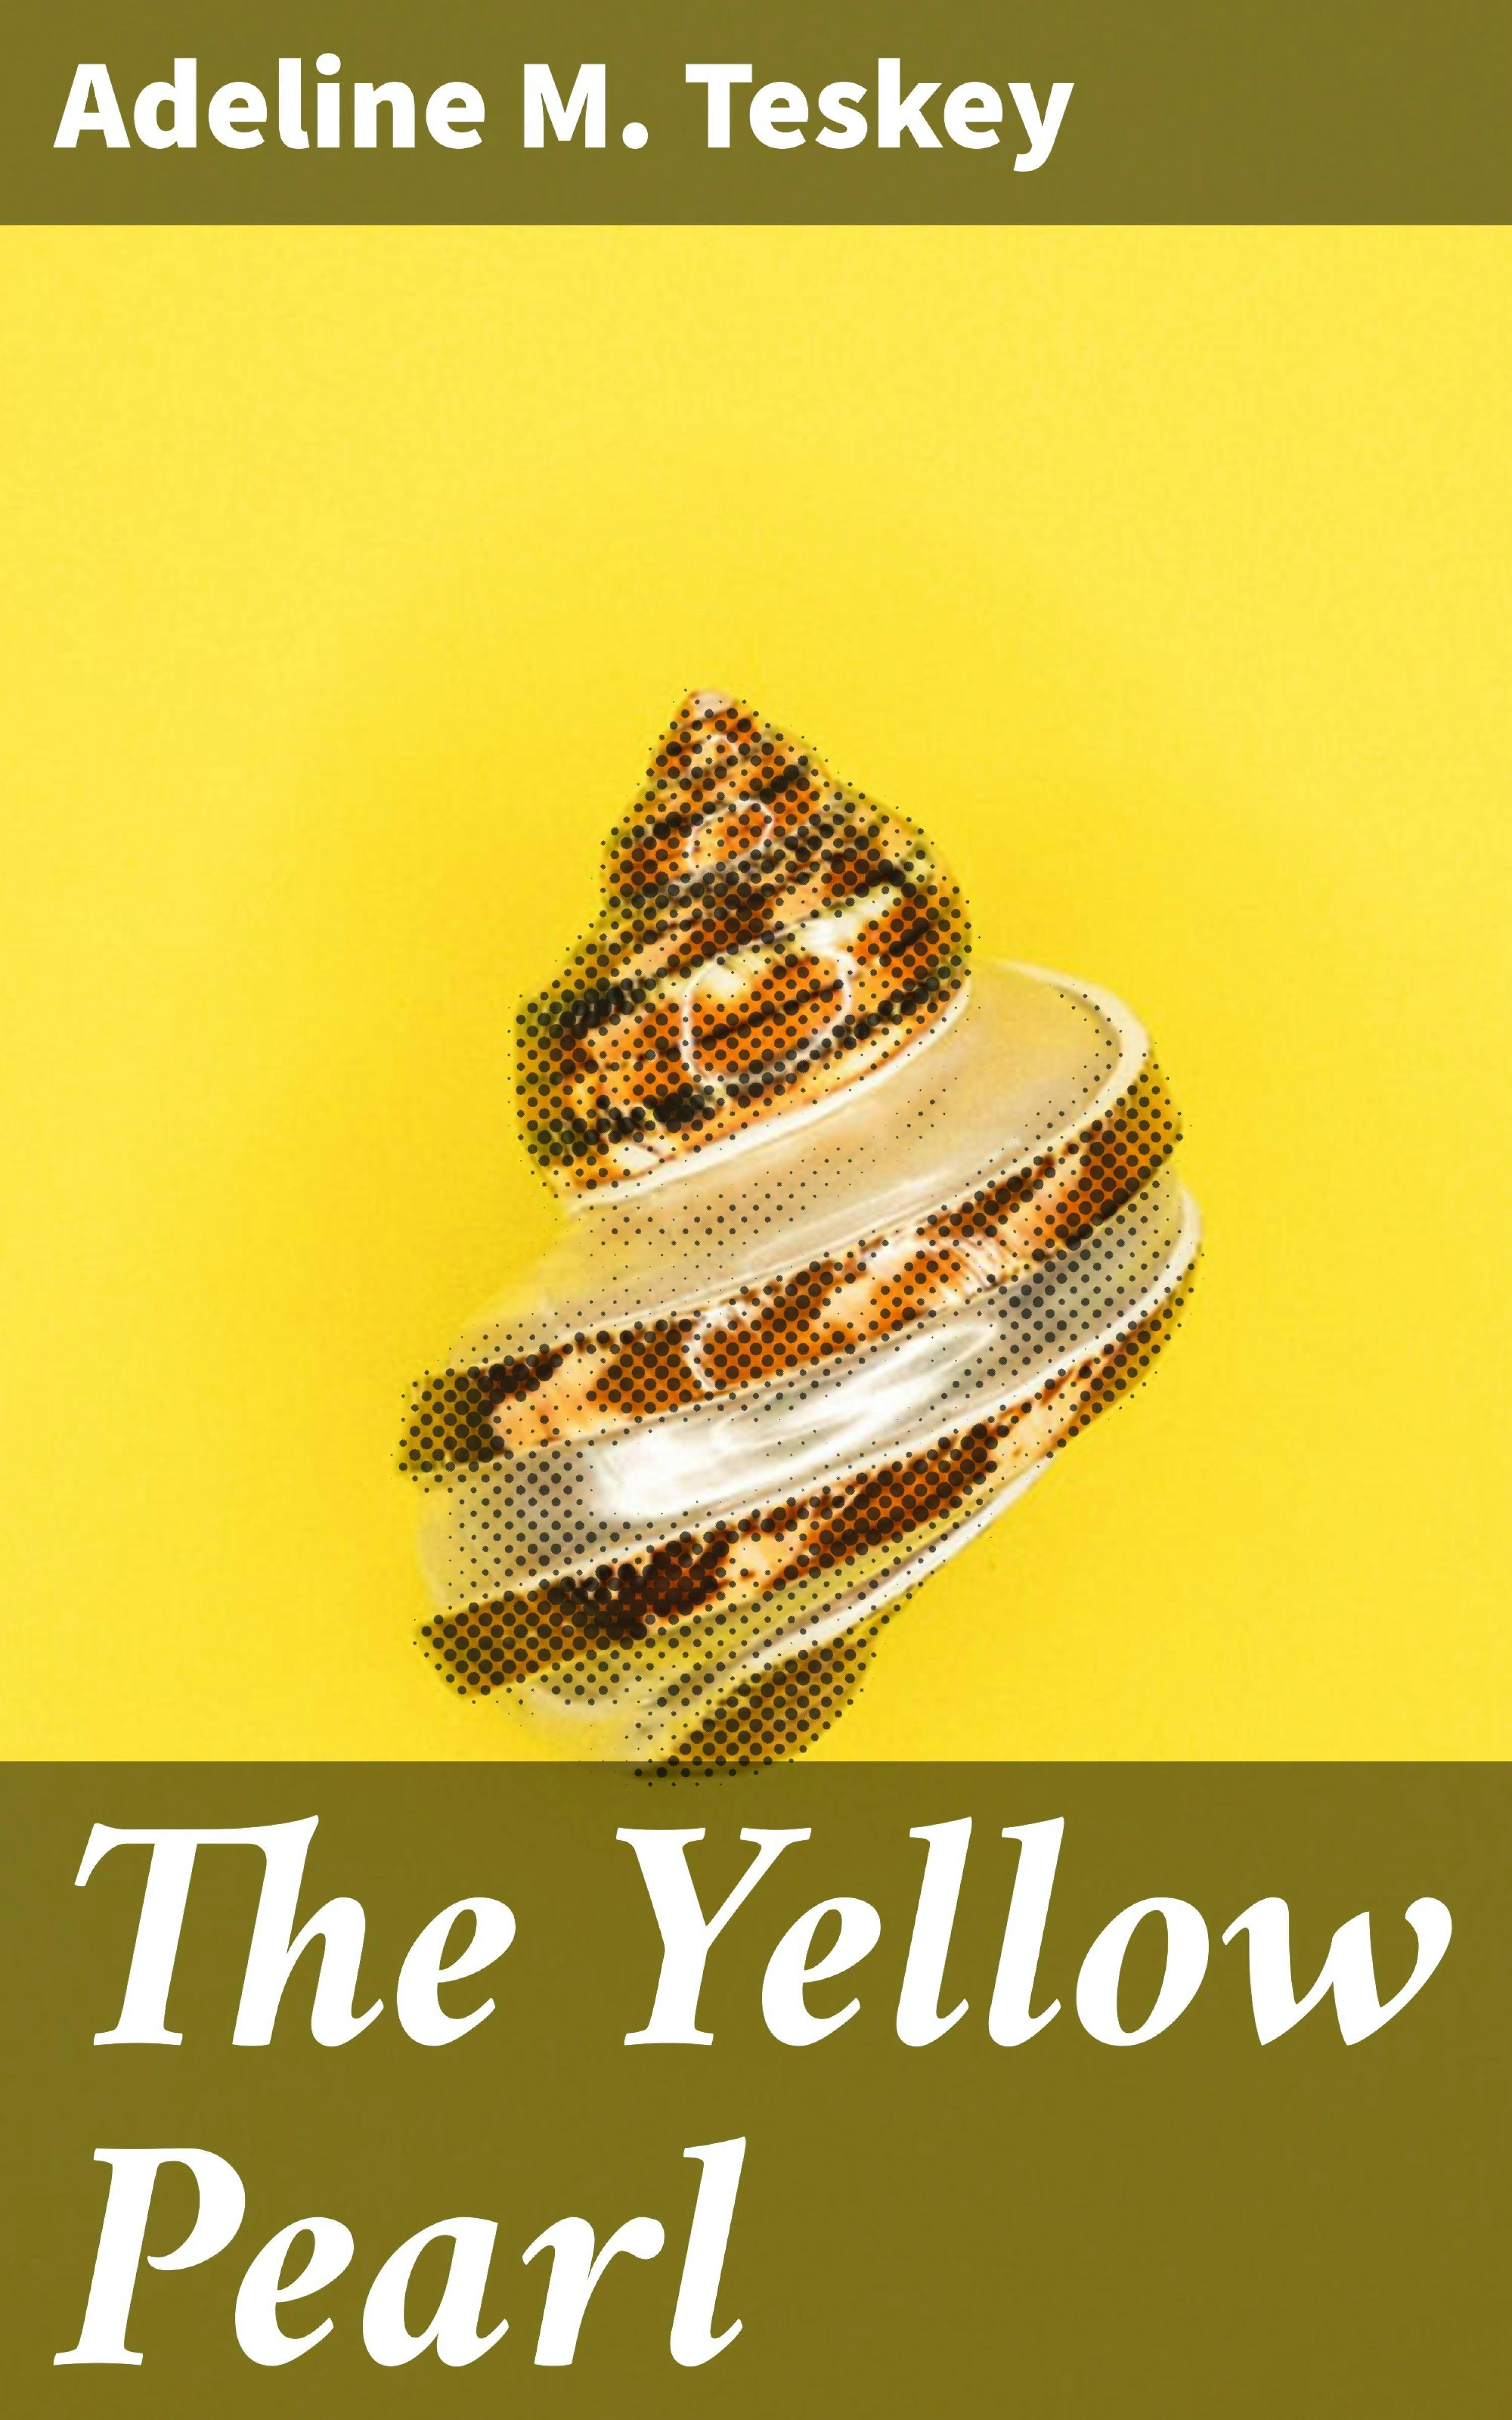 The Yellow Pearl: A Story of the East and the West - Adeline M. Teskey